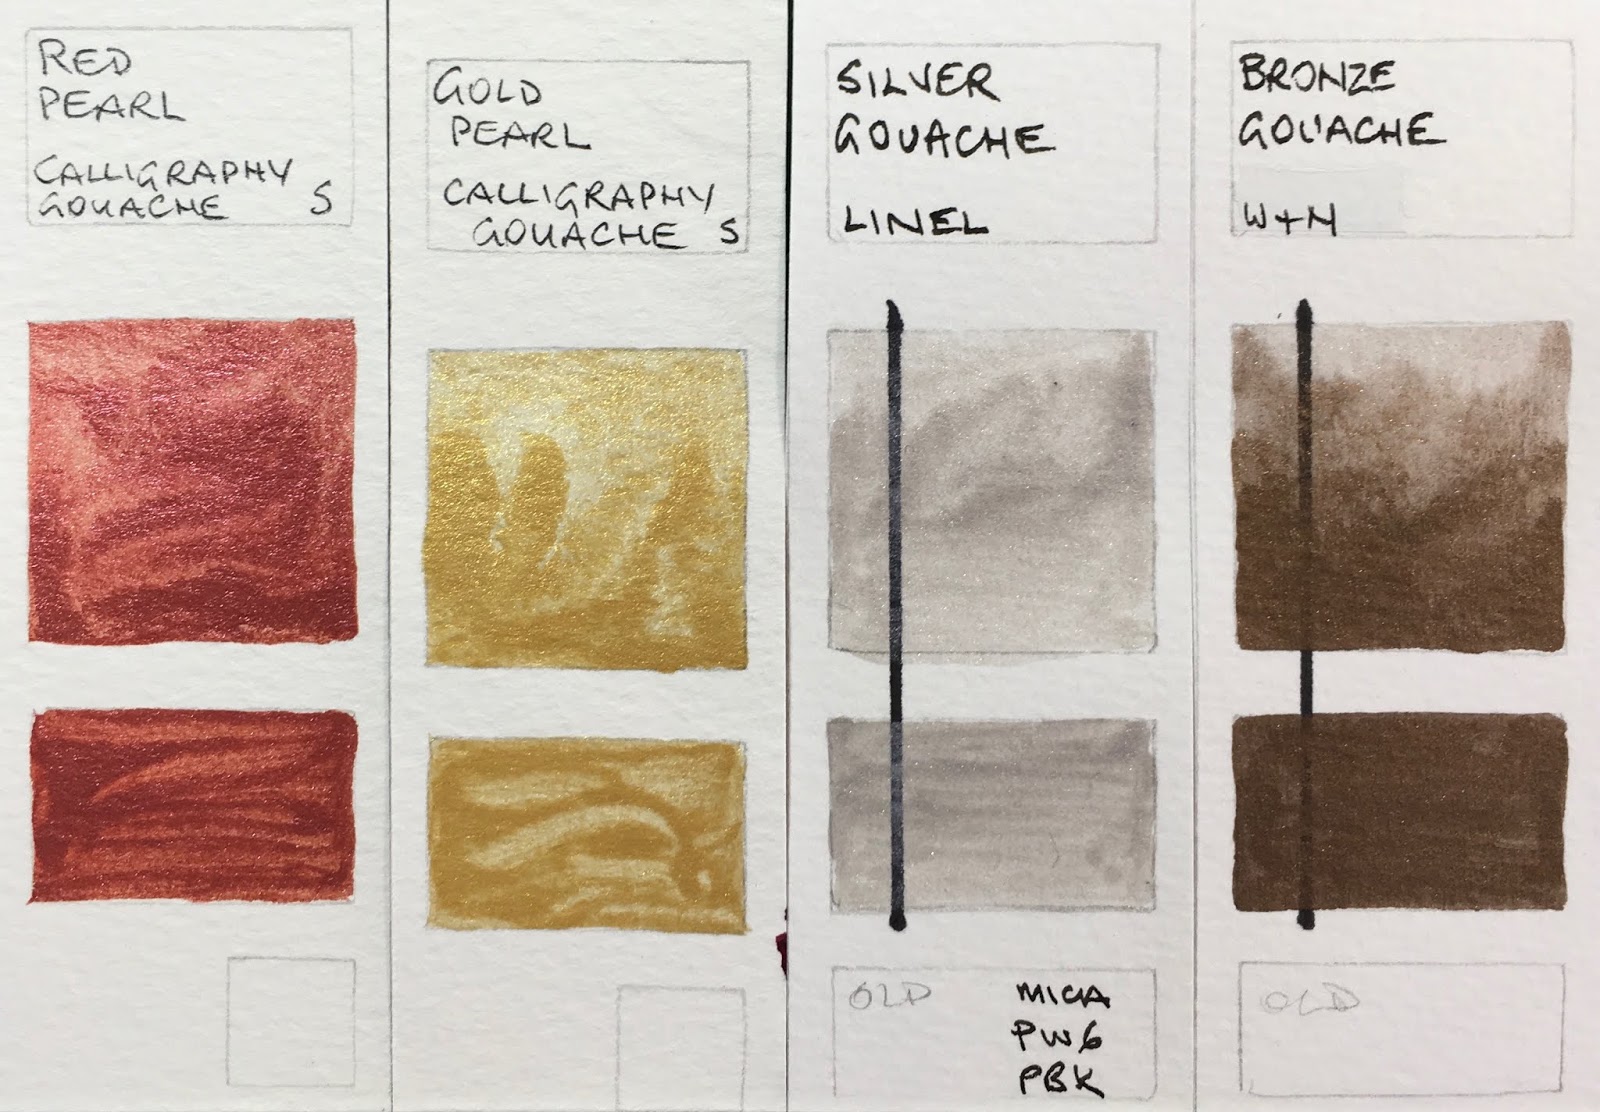 Meeden Gouache Review - First Impressions - The Fearless Brush